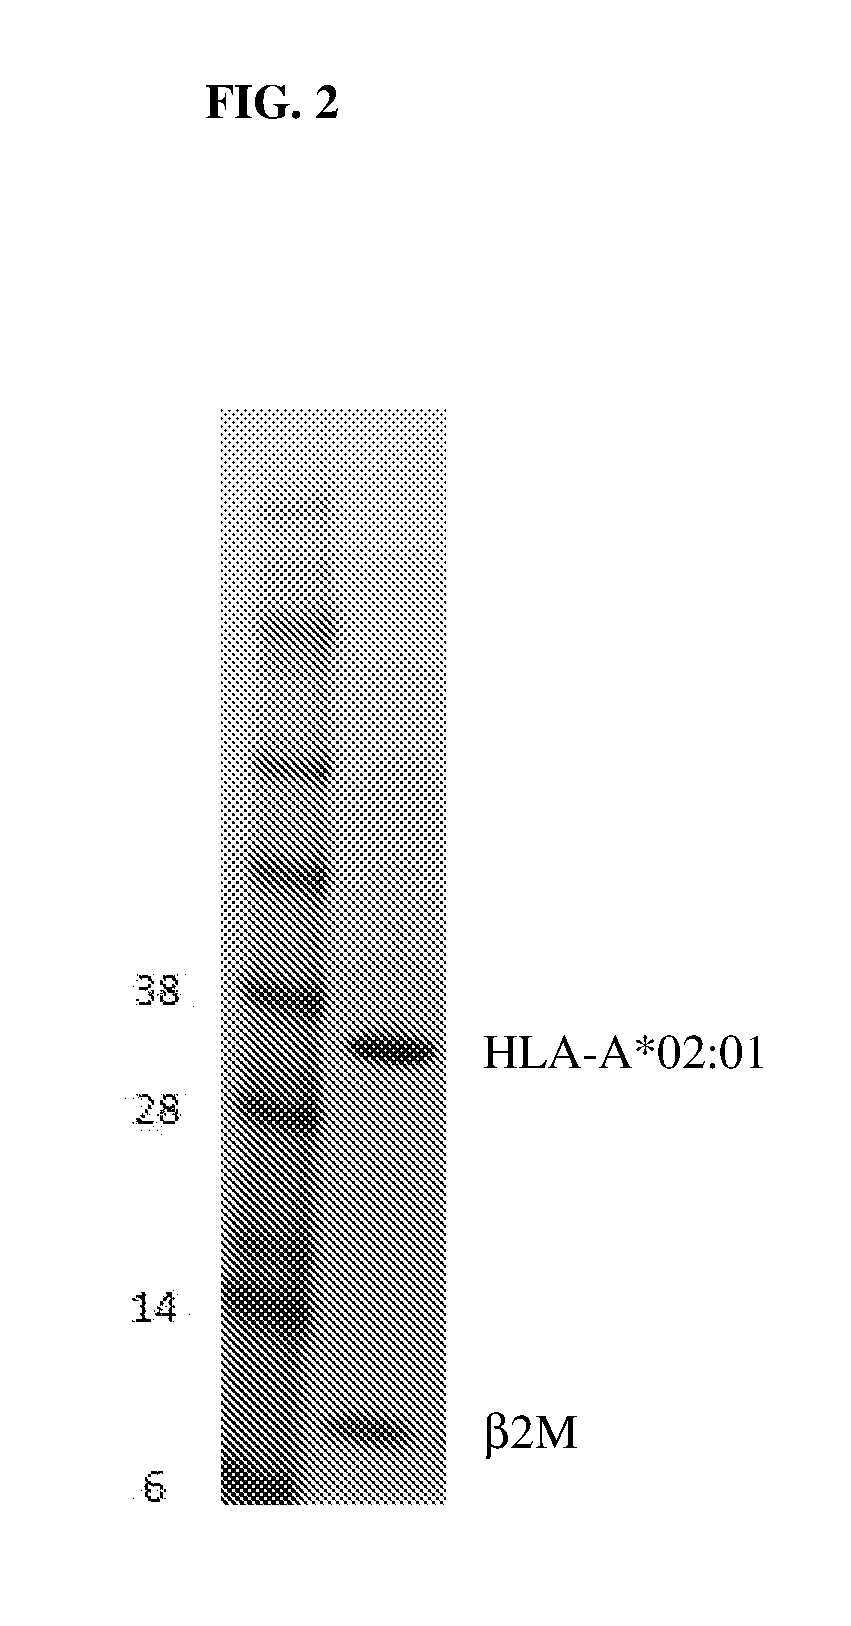 Constructs targeting afp peptide/mhc complexes and uses thereof